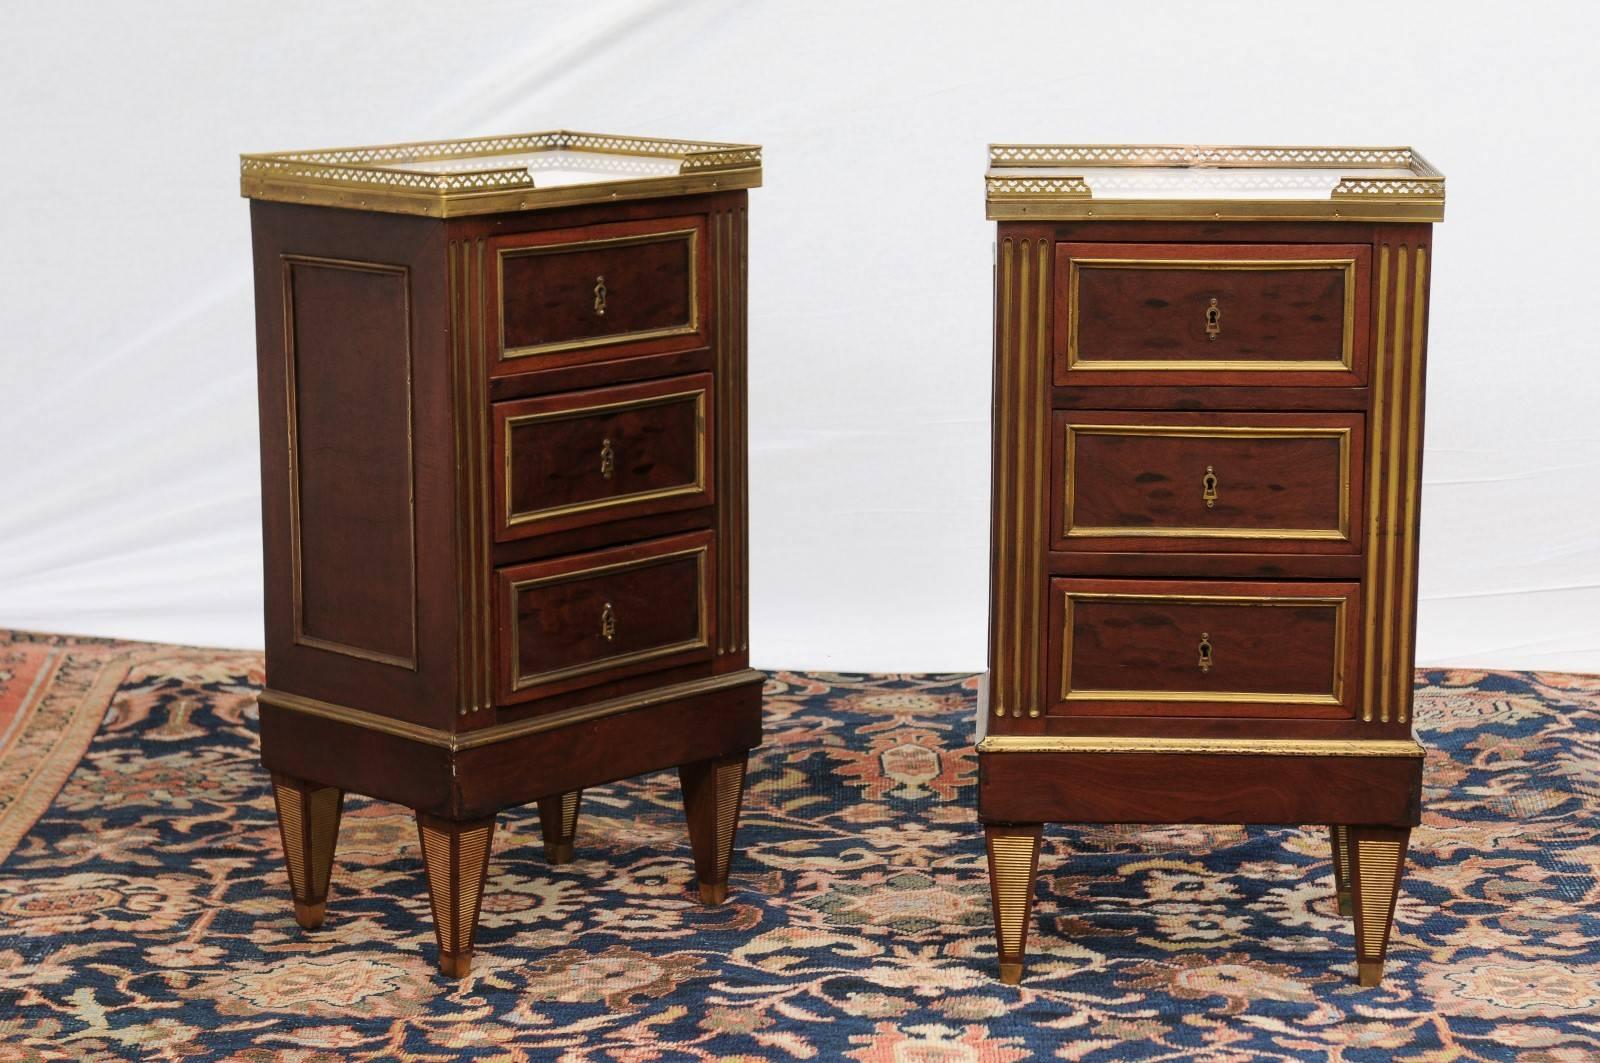 This pair of French Directoire style petite commodes was made in the early 20th century. Each features a three-quarter brass gallery with heart-shaped motifs surrounding a white marble top. The body is made of three dovetailed drawers with gilded